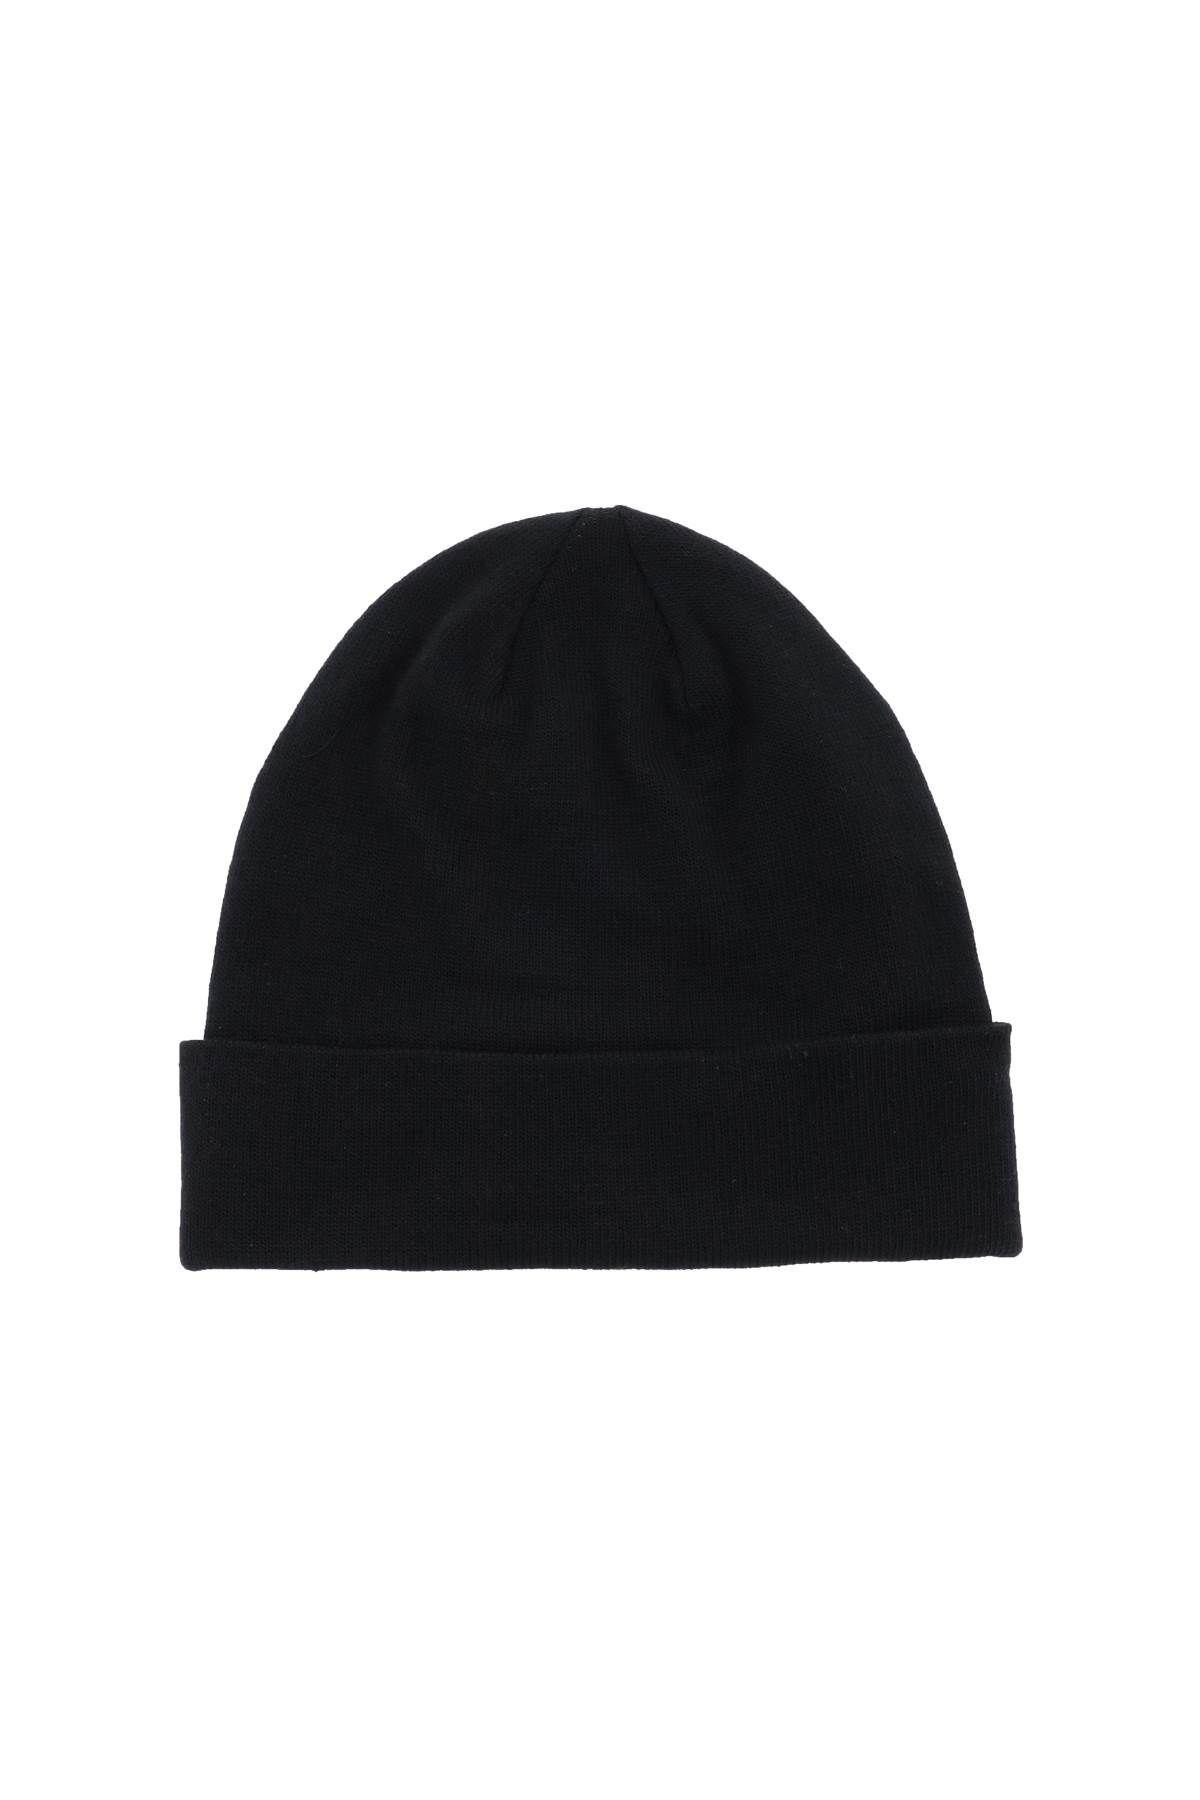 Dock Worker beanie hat The North Face - 2